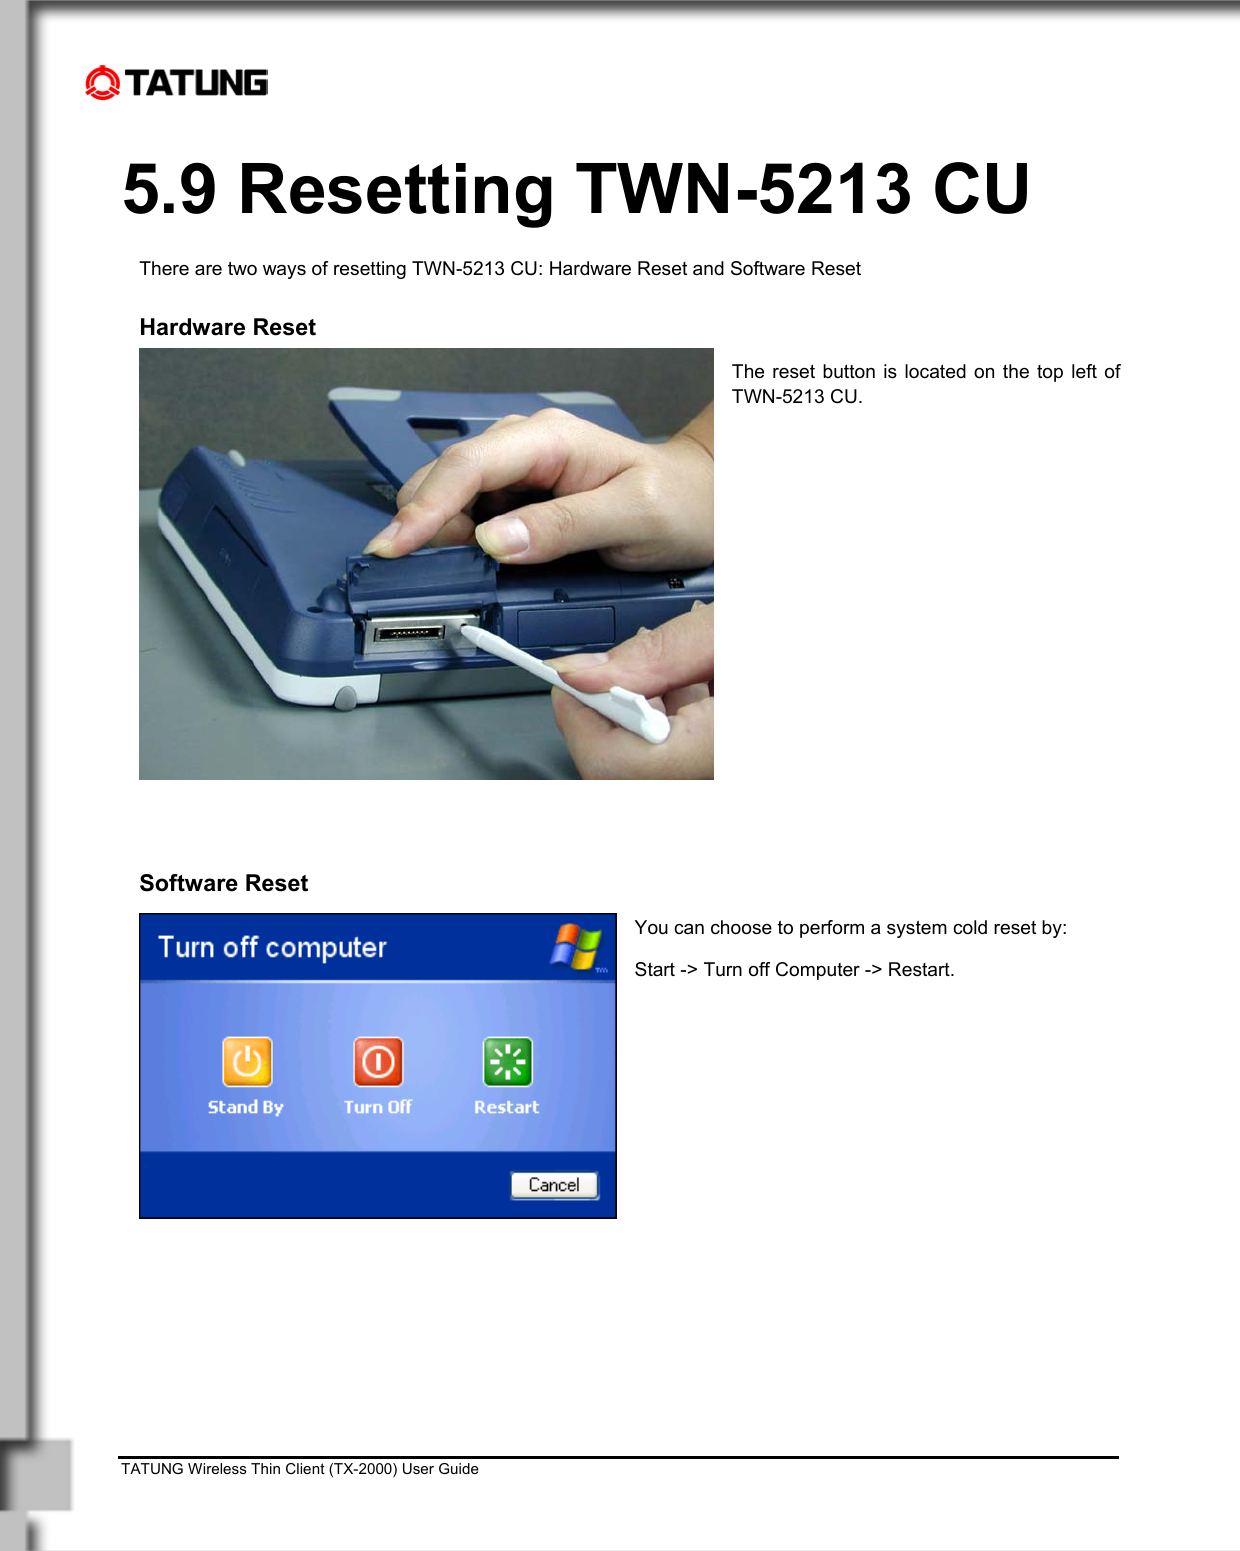    TATUNG Wireless Thin Client (TX-2000) User Guide                                                                                                                              5.9 Resetting TWN-5213 CU There are two ways of resetting TWN-5213 CU: Hardware Reset and Software Reset  Hardware Reset The reset button is located on the top left of TWN-5213 CU.               Software Reset You can choose to perform a system cold reset by:  Start -&gt; Turn off Computer -&gt; Restart. 